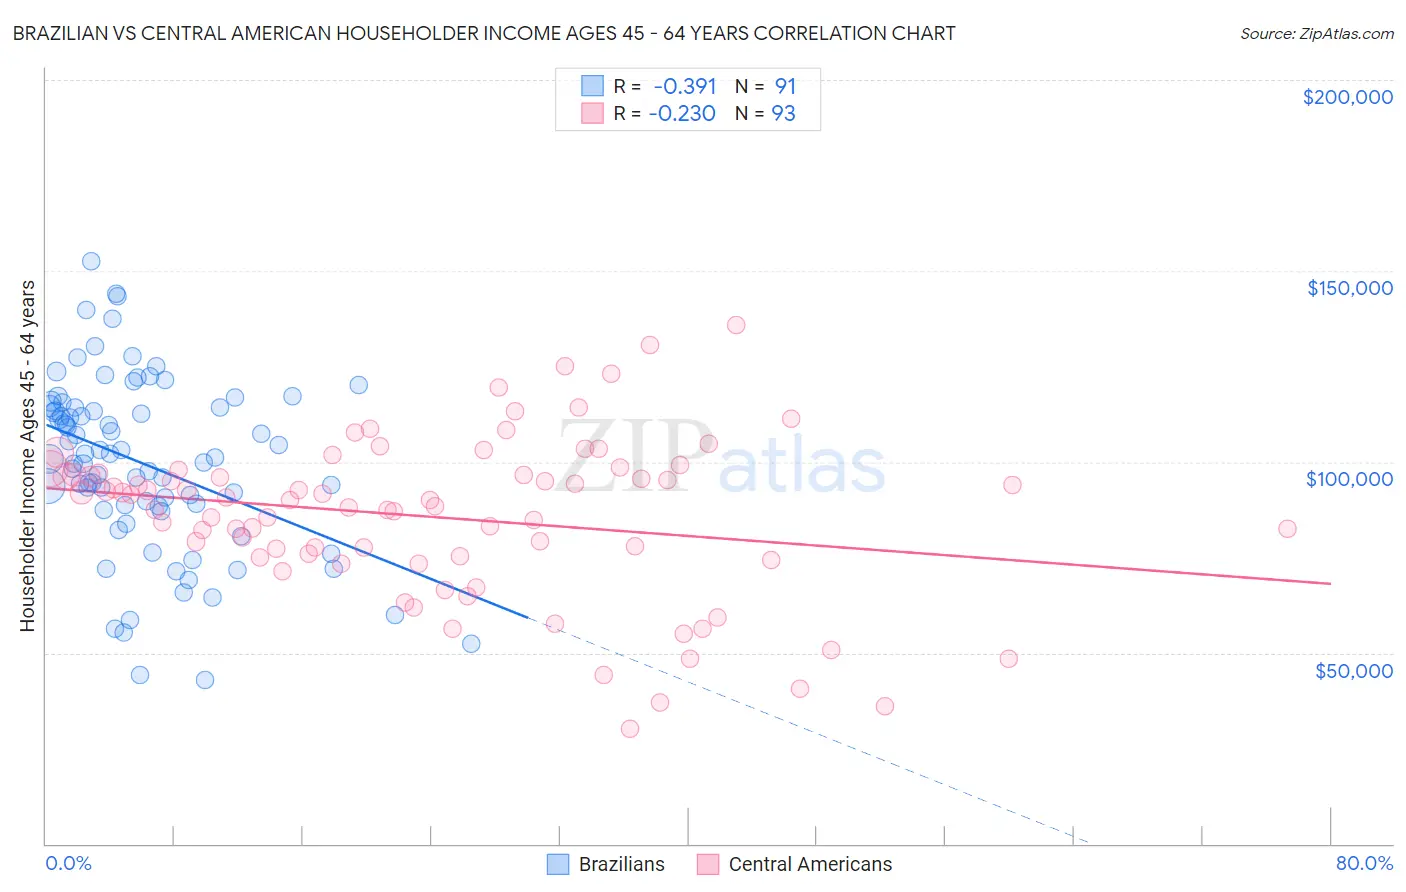 Brazilian vs Central American Householder Income Ages 45 - 64 years